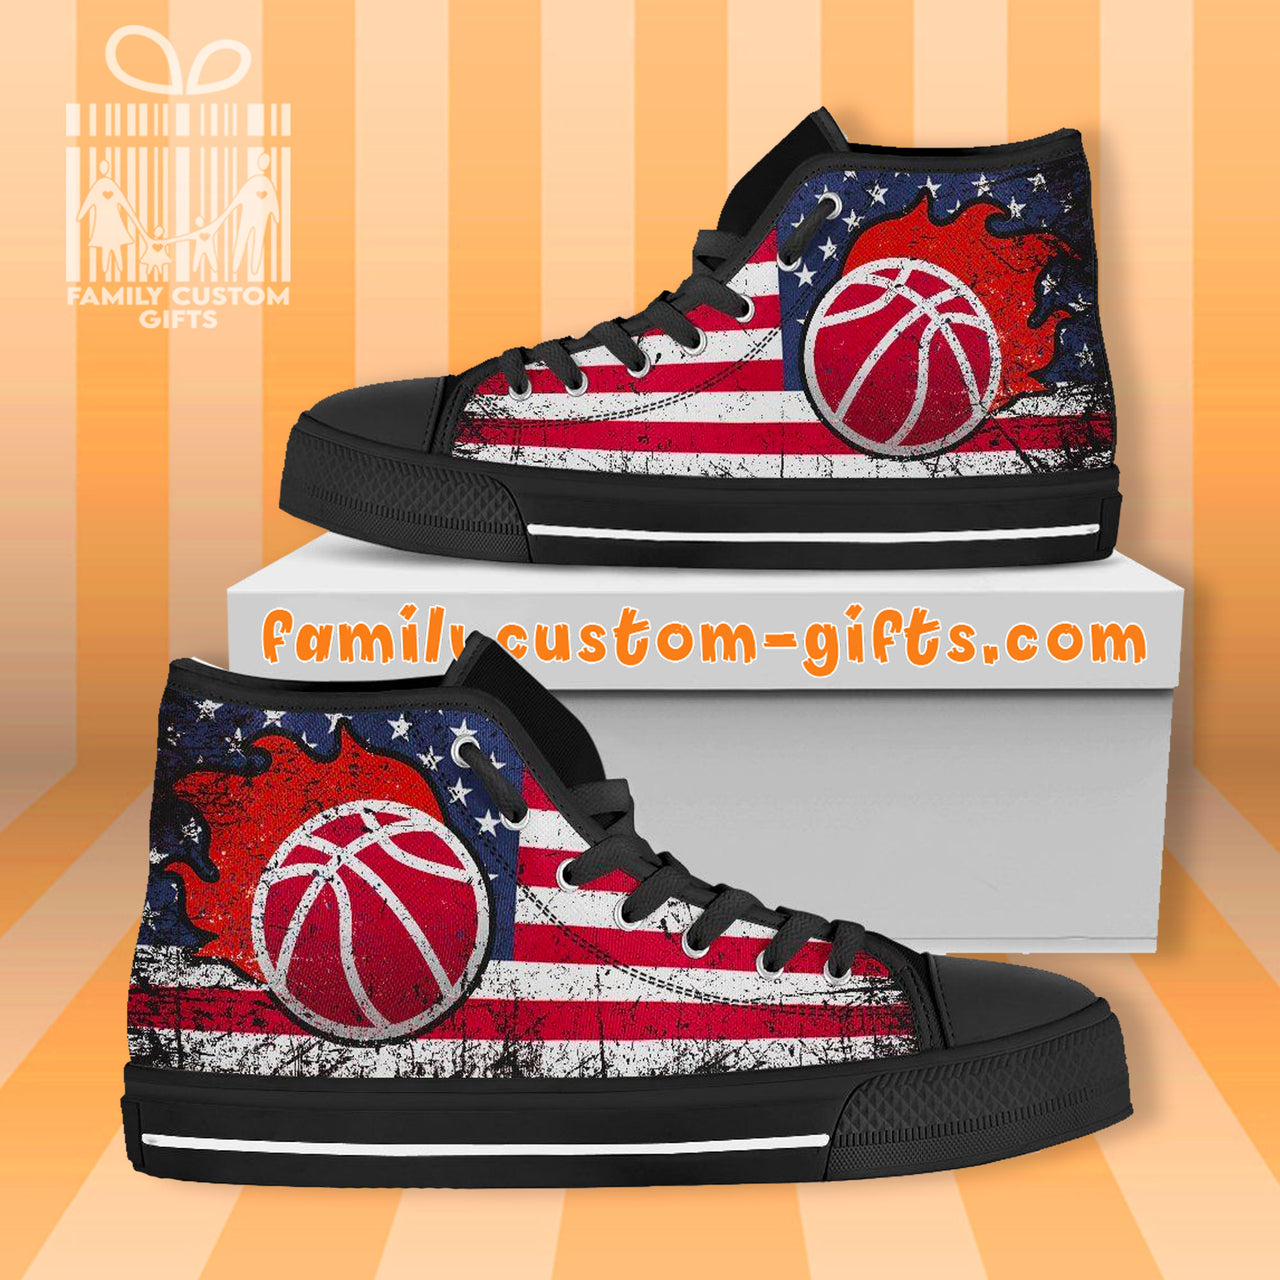 Basketball American USA Flag High Top Canvas Shoes for Men Women 3D Prints Fashion Sneakers